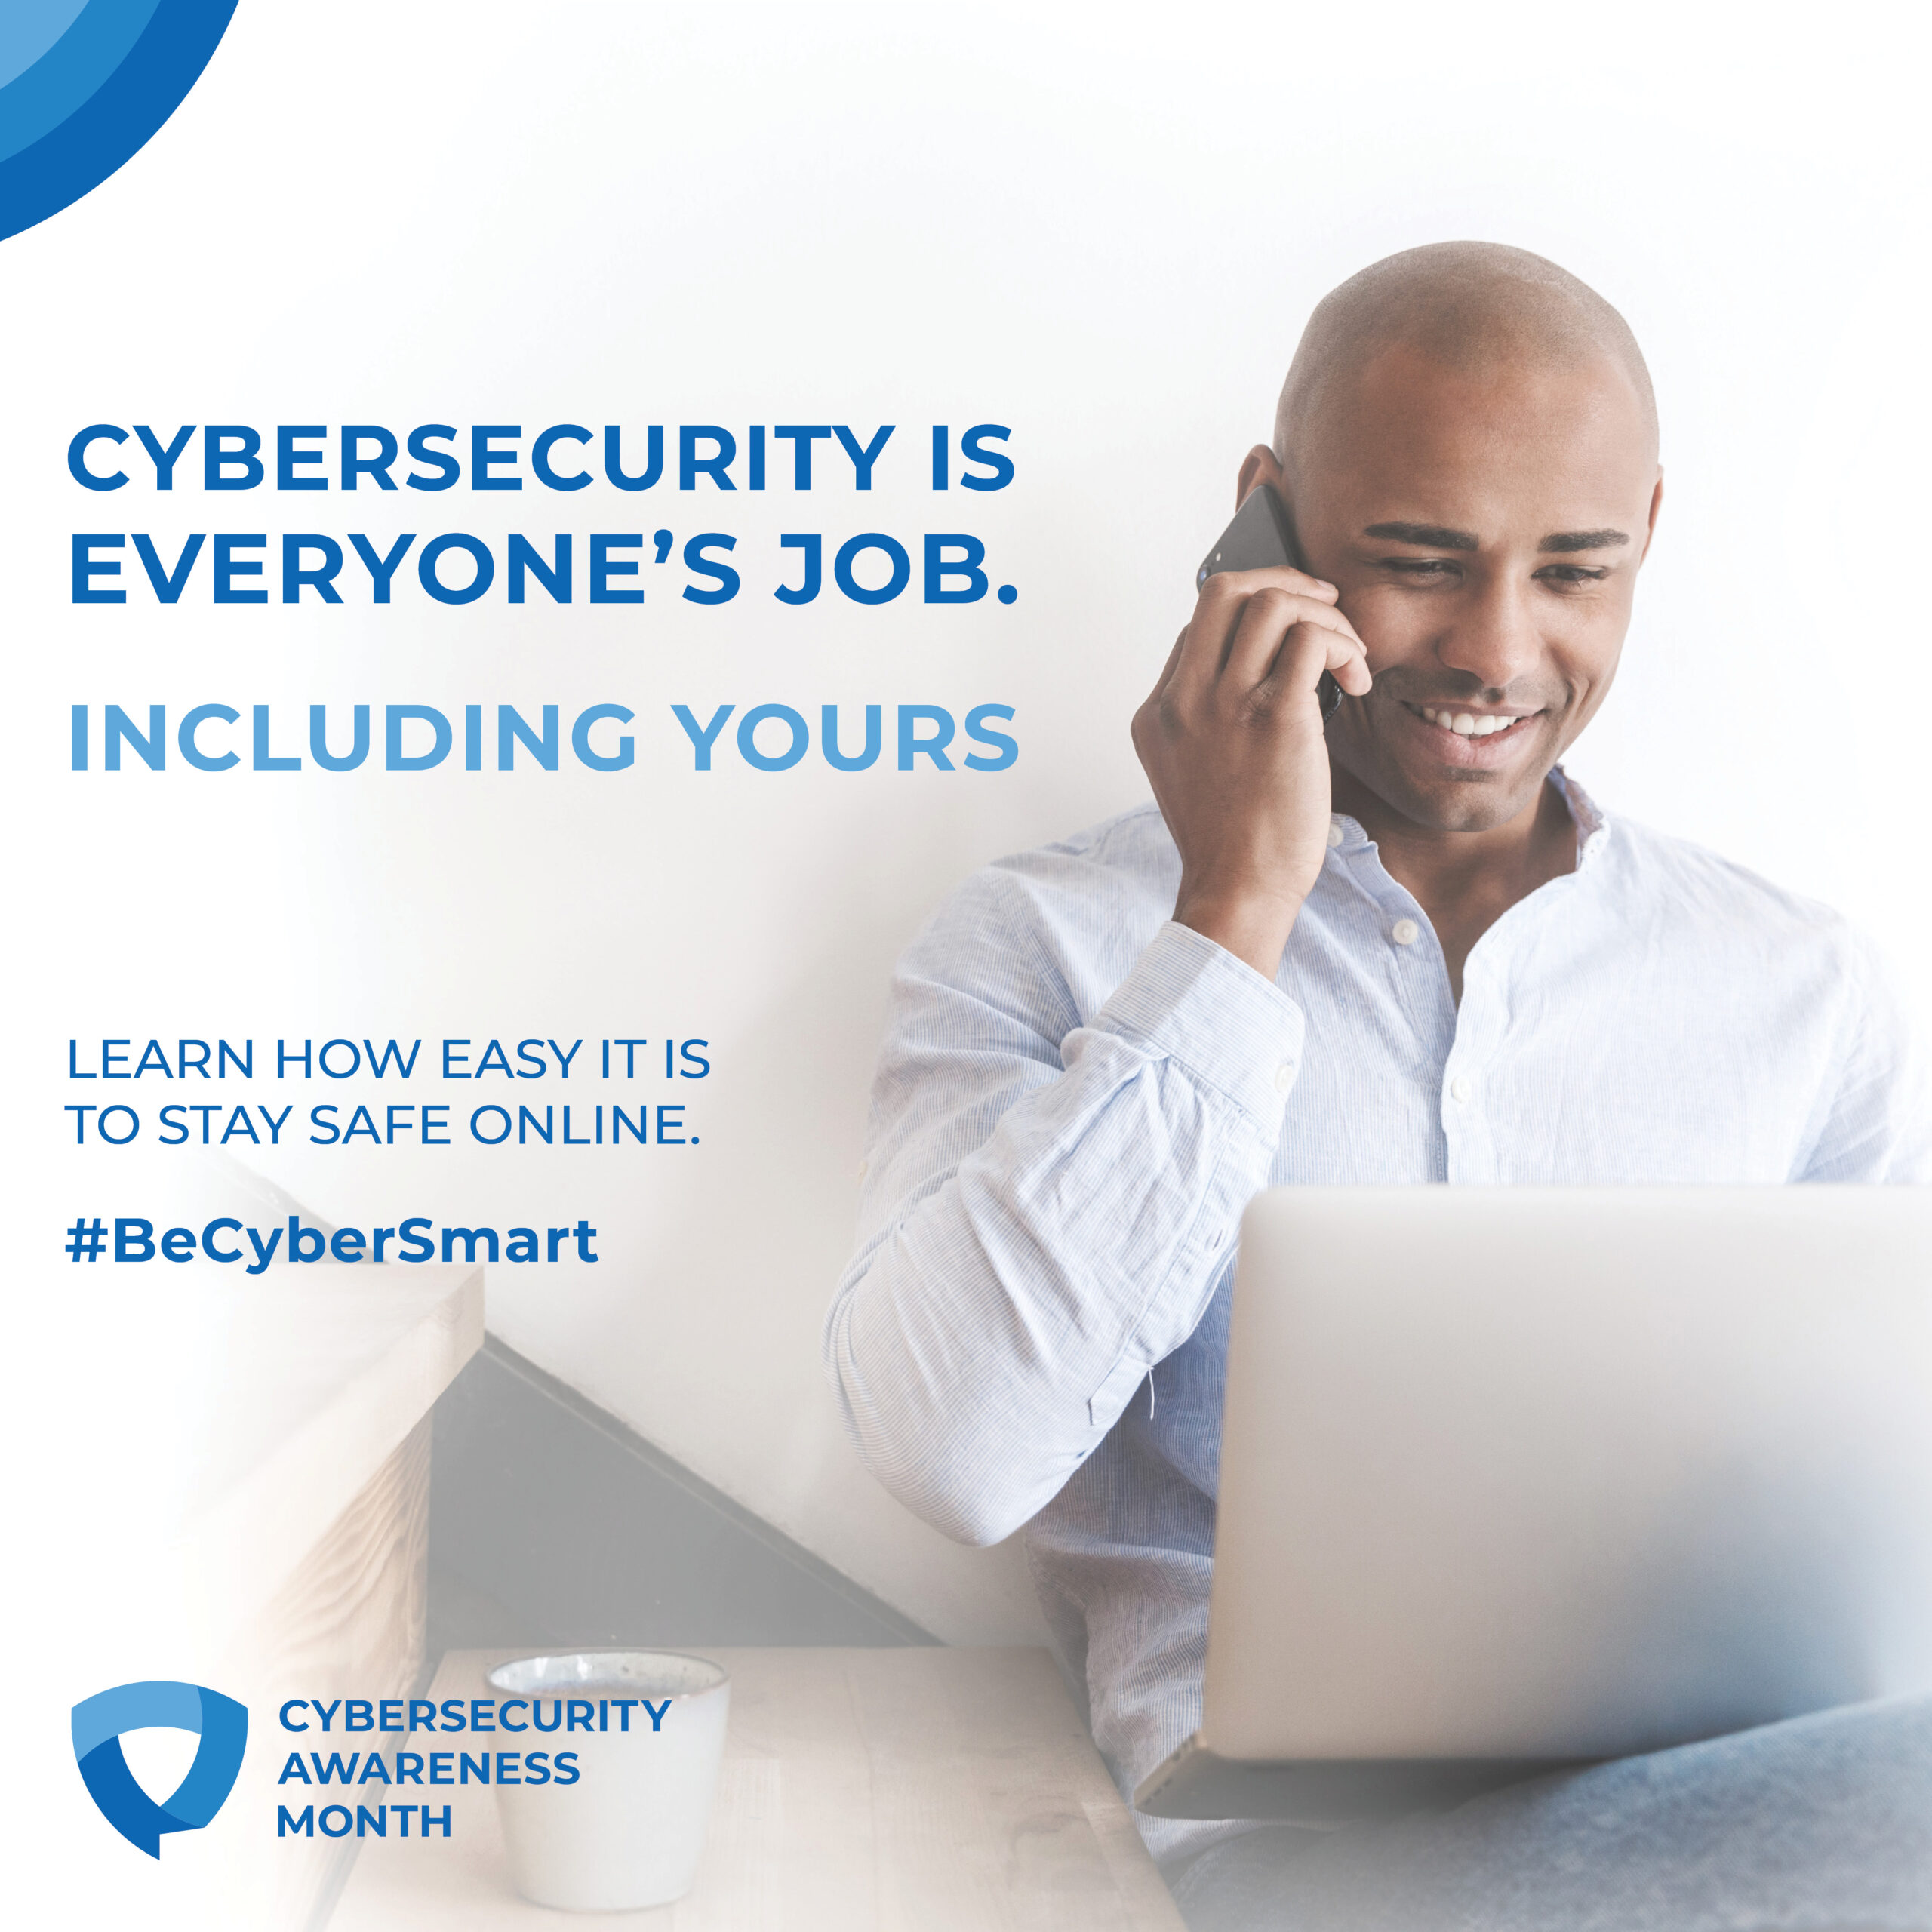 A man is smiling while talking on a mobile phone, sitting at a desk with a laptop. The text reads, "CYBERSECURITY IS EVERYONE'S JOB. INCLUDING YOURS. Learn how easy it is to stay safe online. #BeCyberSmart." The image promotes Cybersecurity Awareness Month.